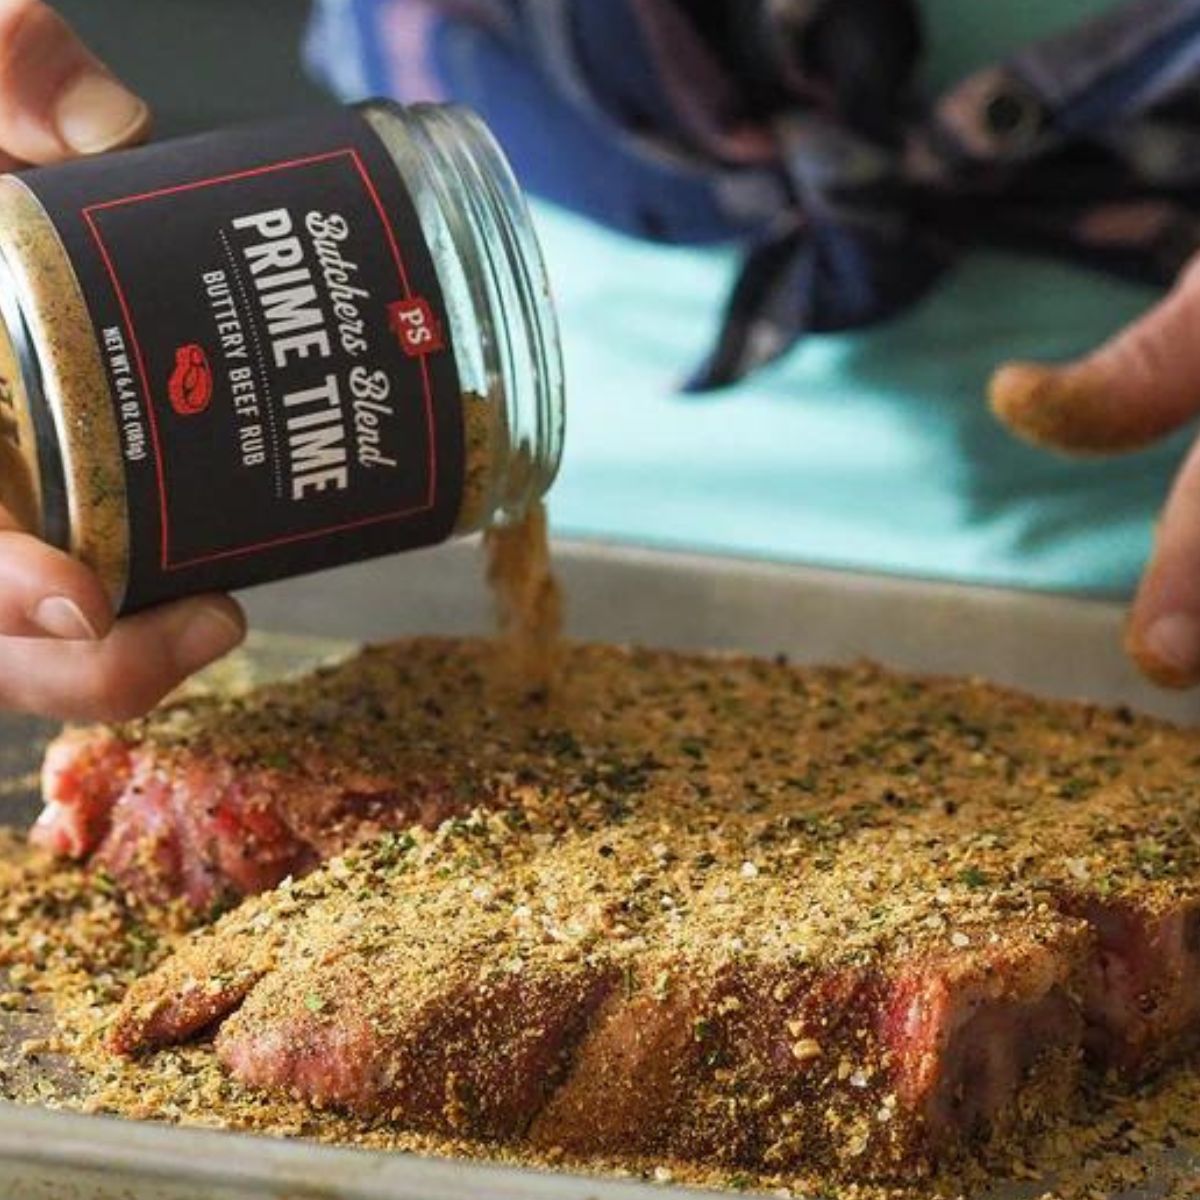 Prime Time Buttery Beef Rub- Add to your burger mix or rub on your steak